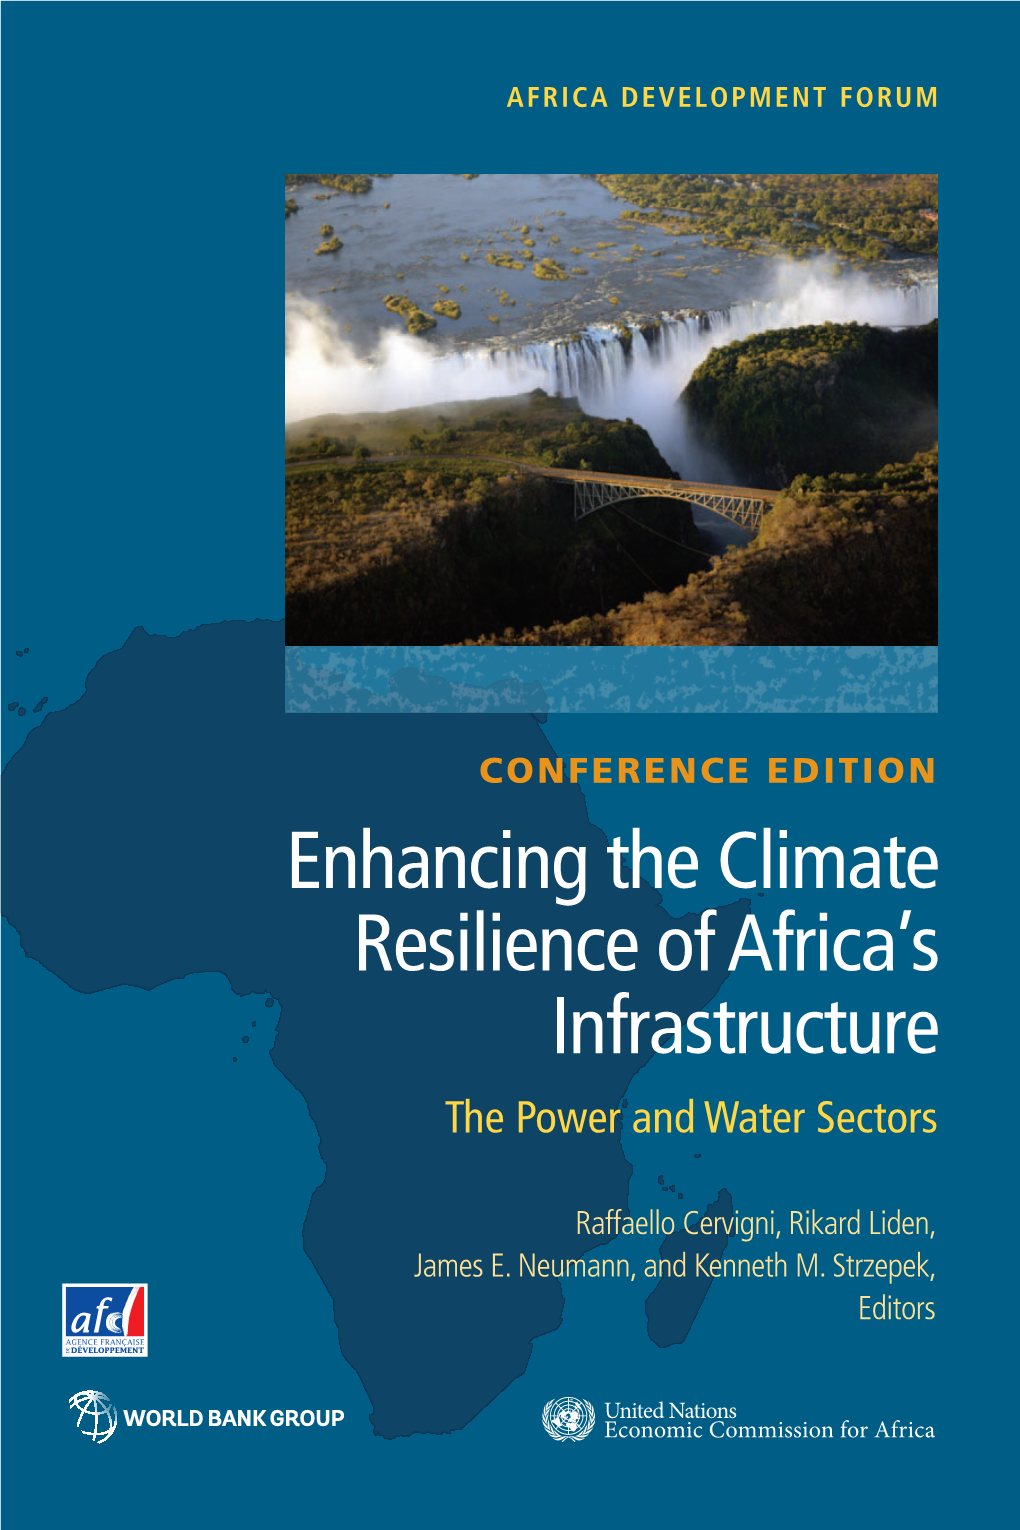 Enhancing the Climate Resilience of Africa's Infrastructure